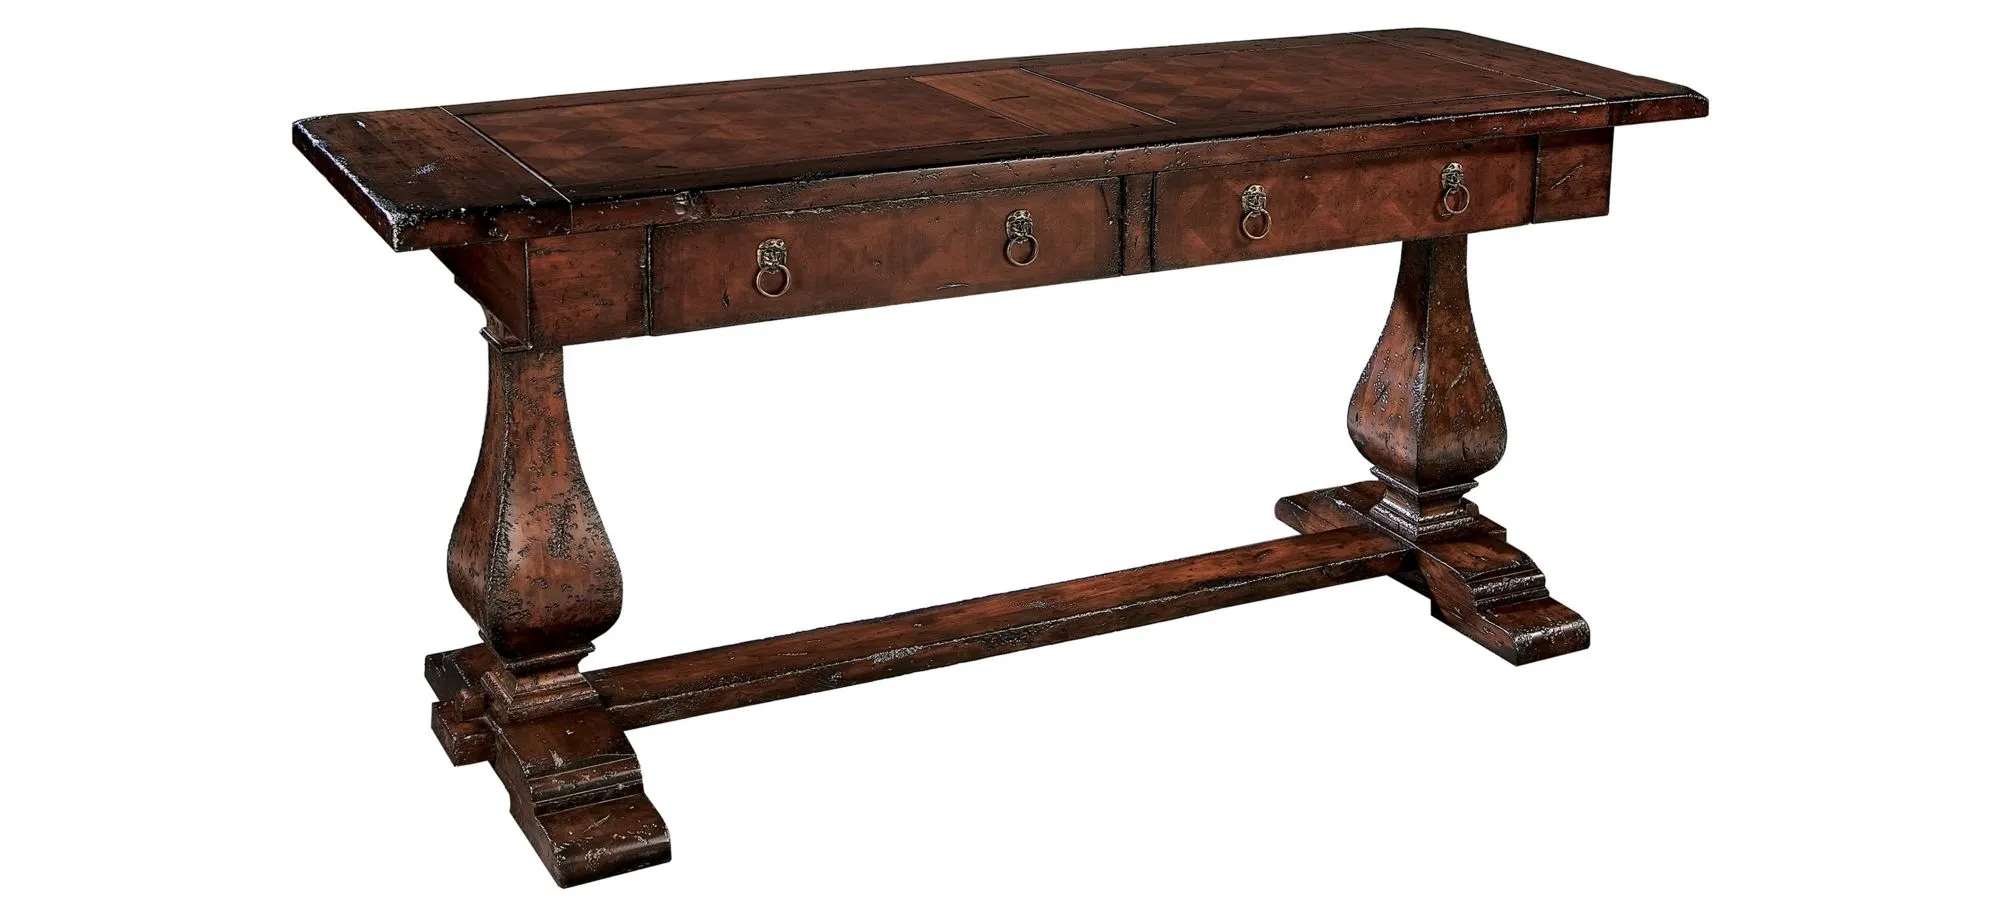 Havana Console Table in ANTIQUE by Hekman Furniture Company